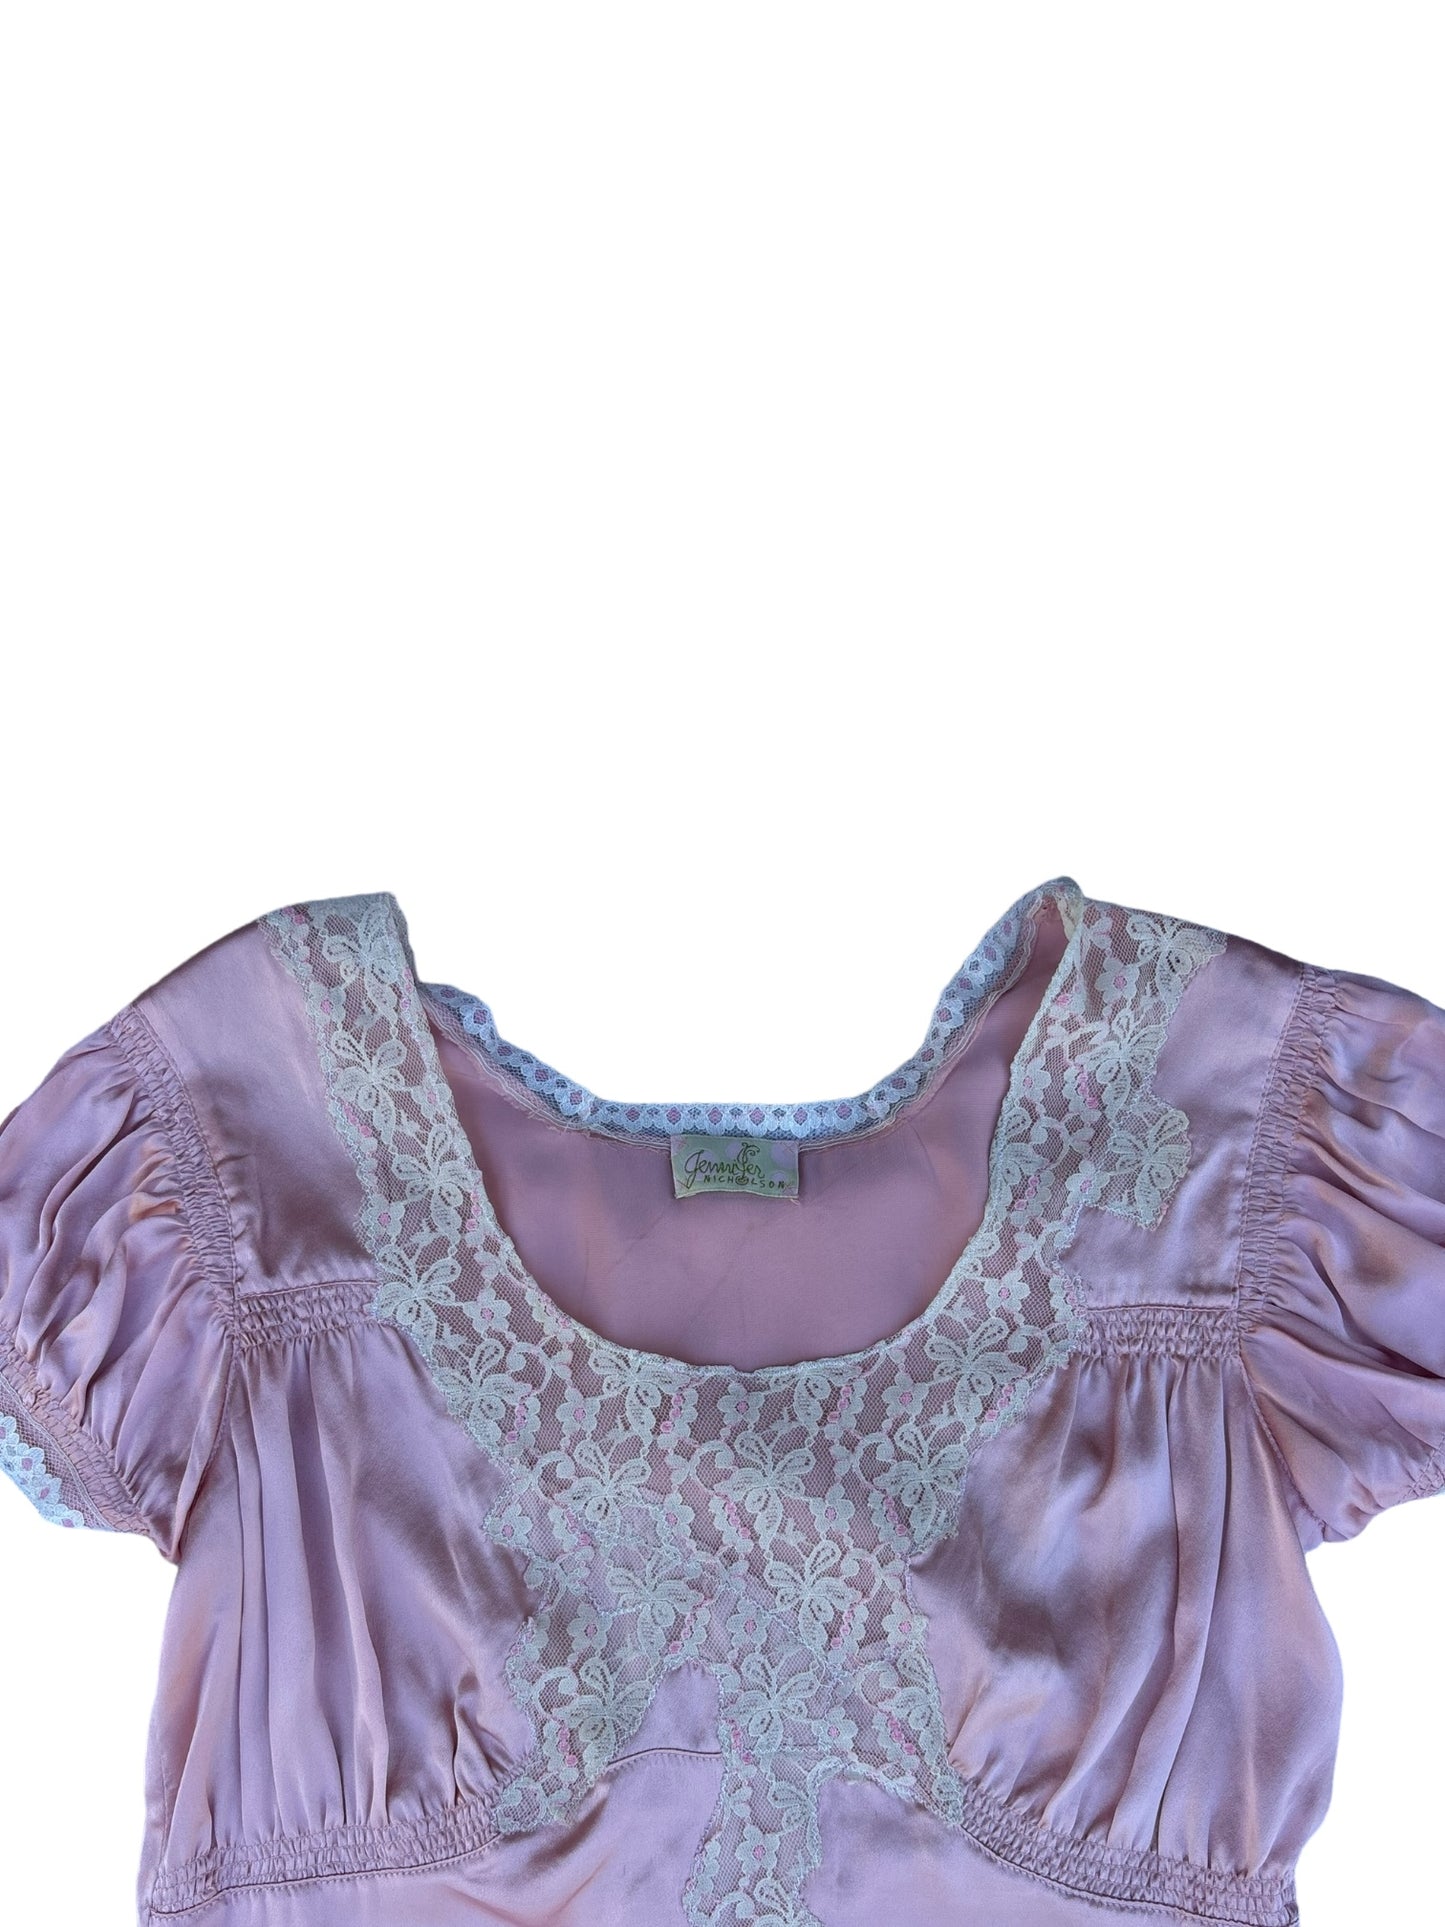 Vintage Pink and Lace Top - S